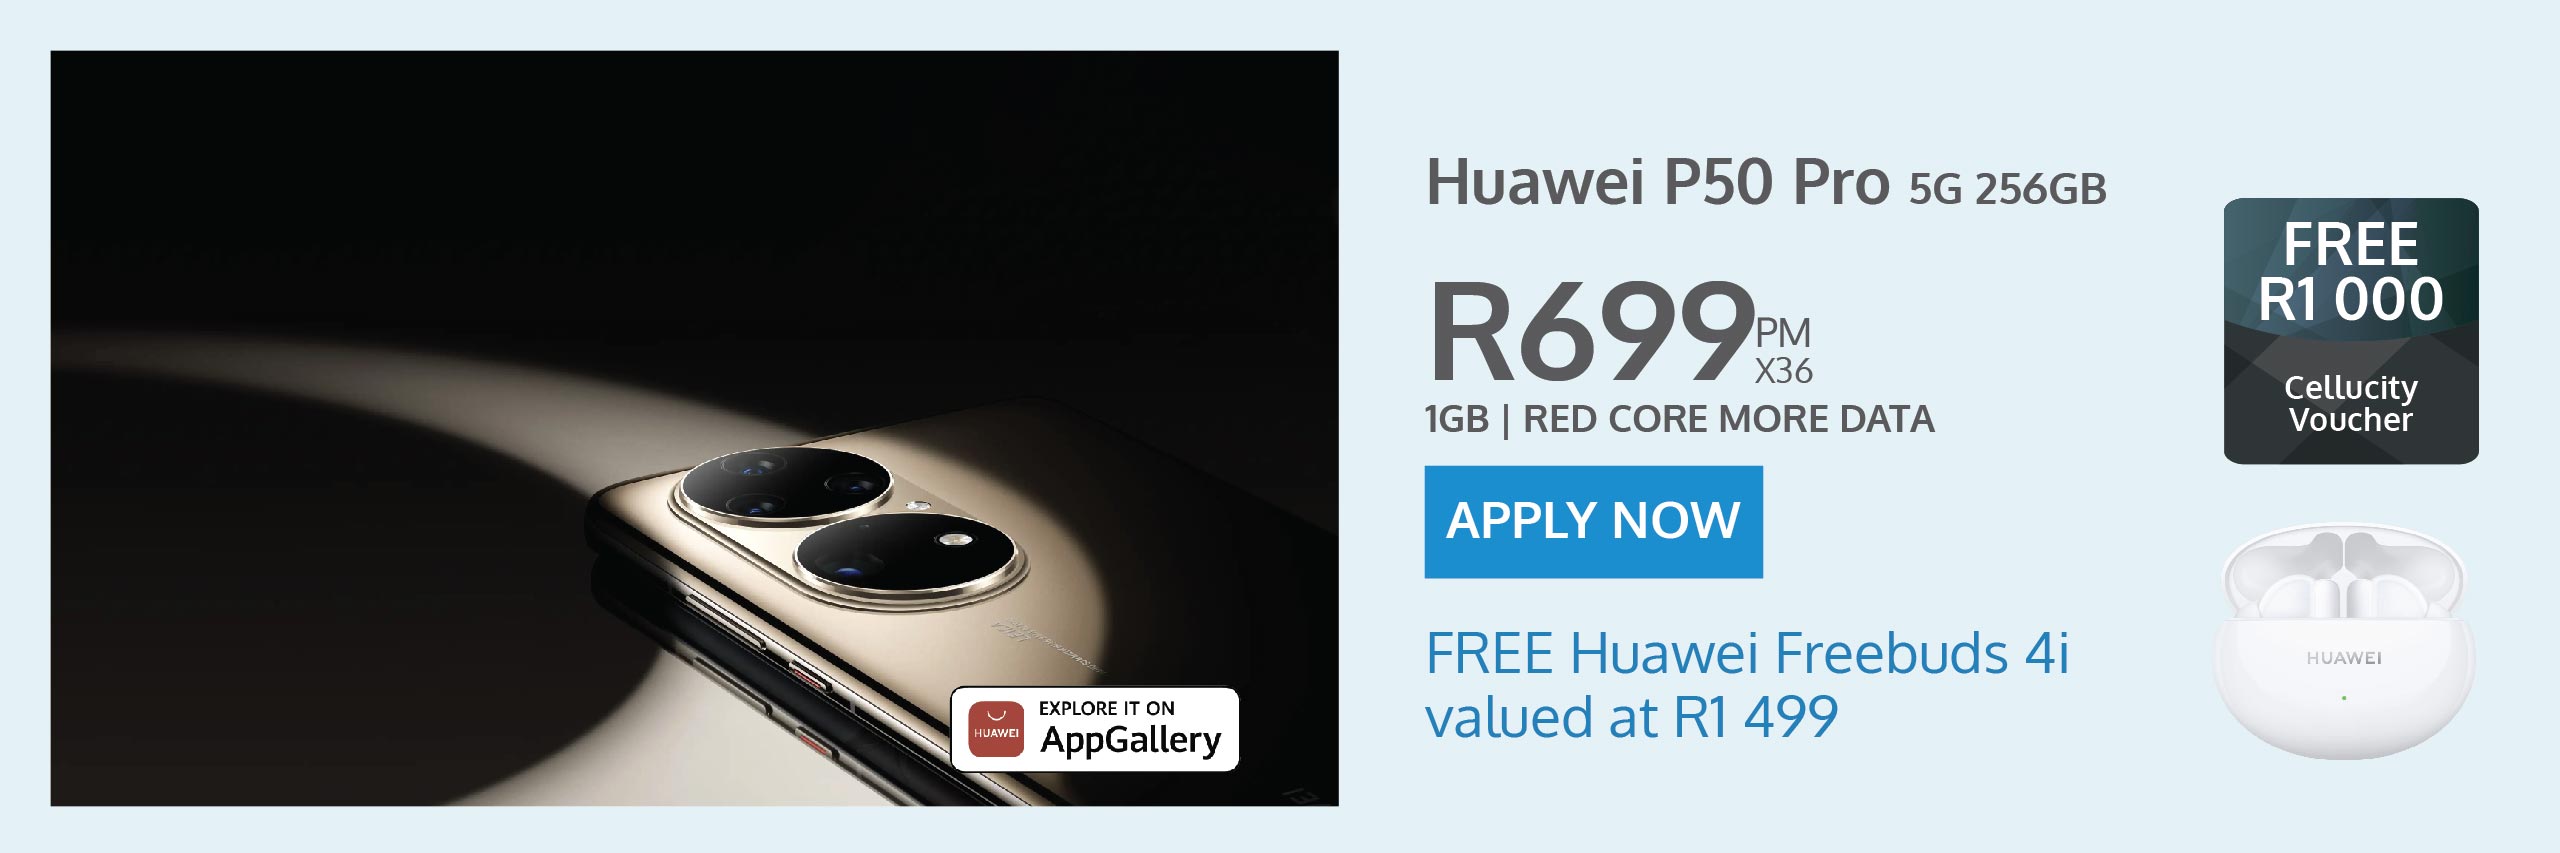 Huawei P50 Pro contract deal